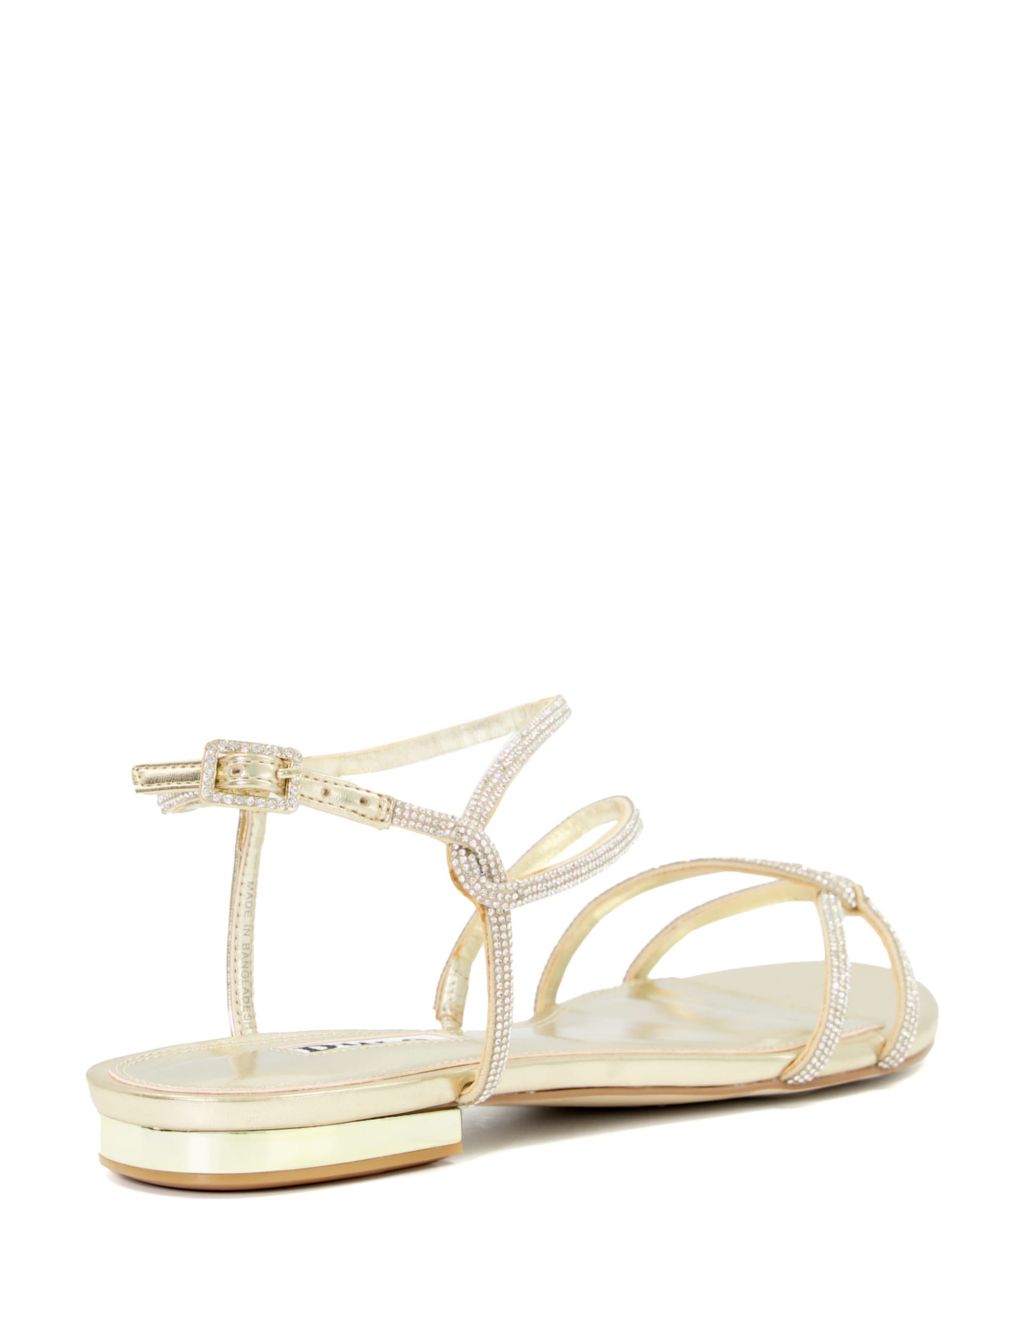 Sparkle Strappy Flat Sandals image 4